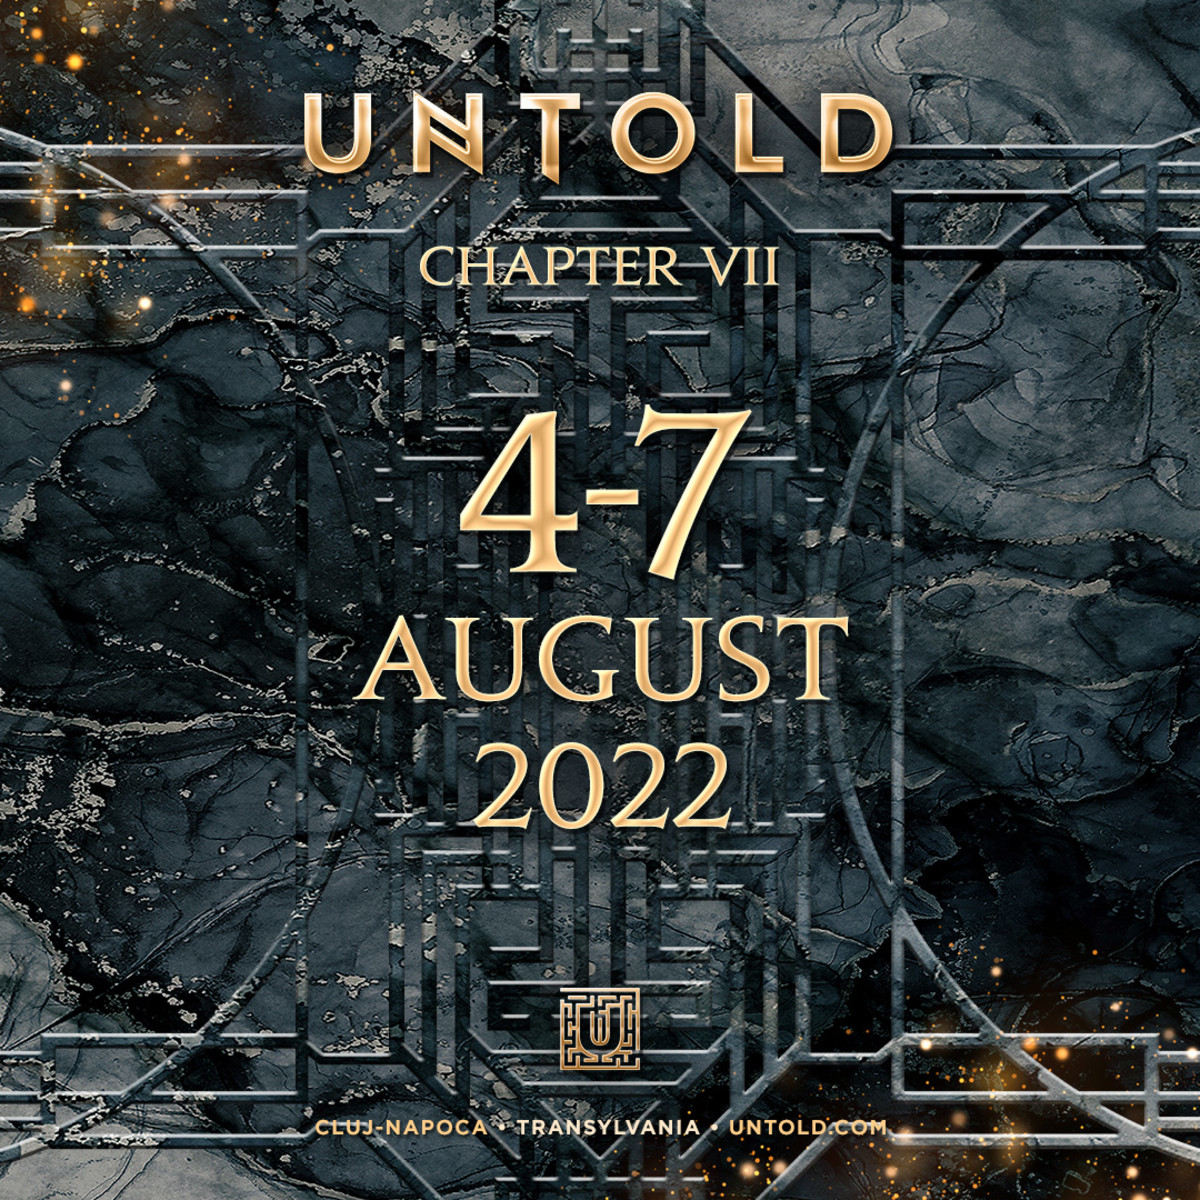 UNTOLD Festival, one of the largest festivals in the EU, locks in early August dates for 2022 edition.